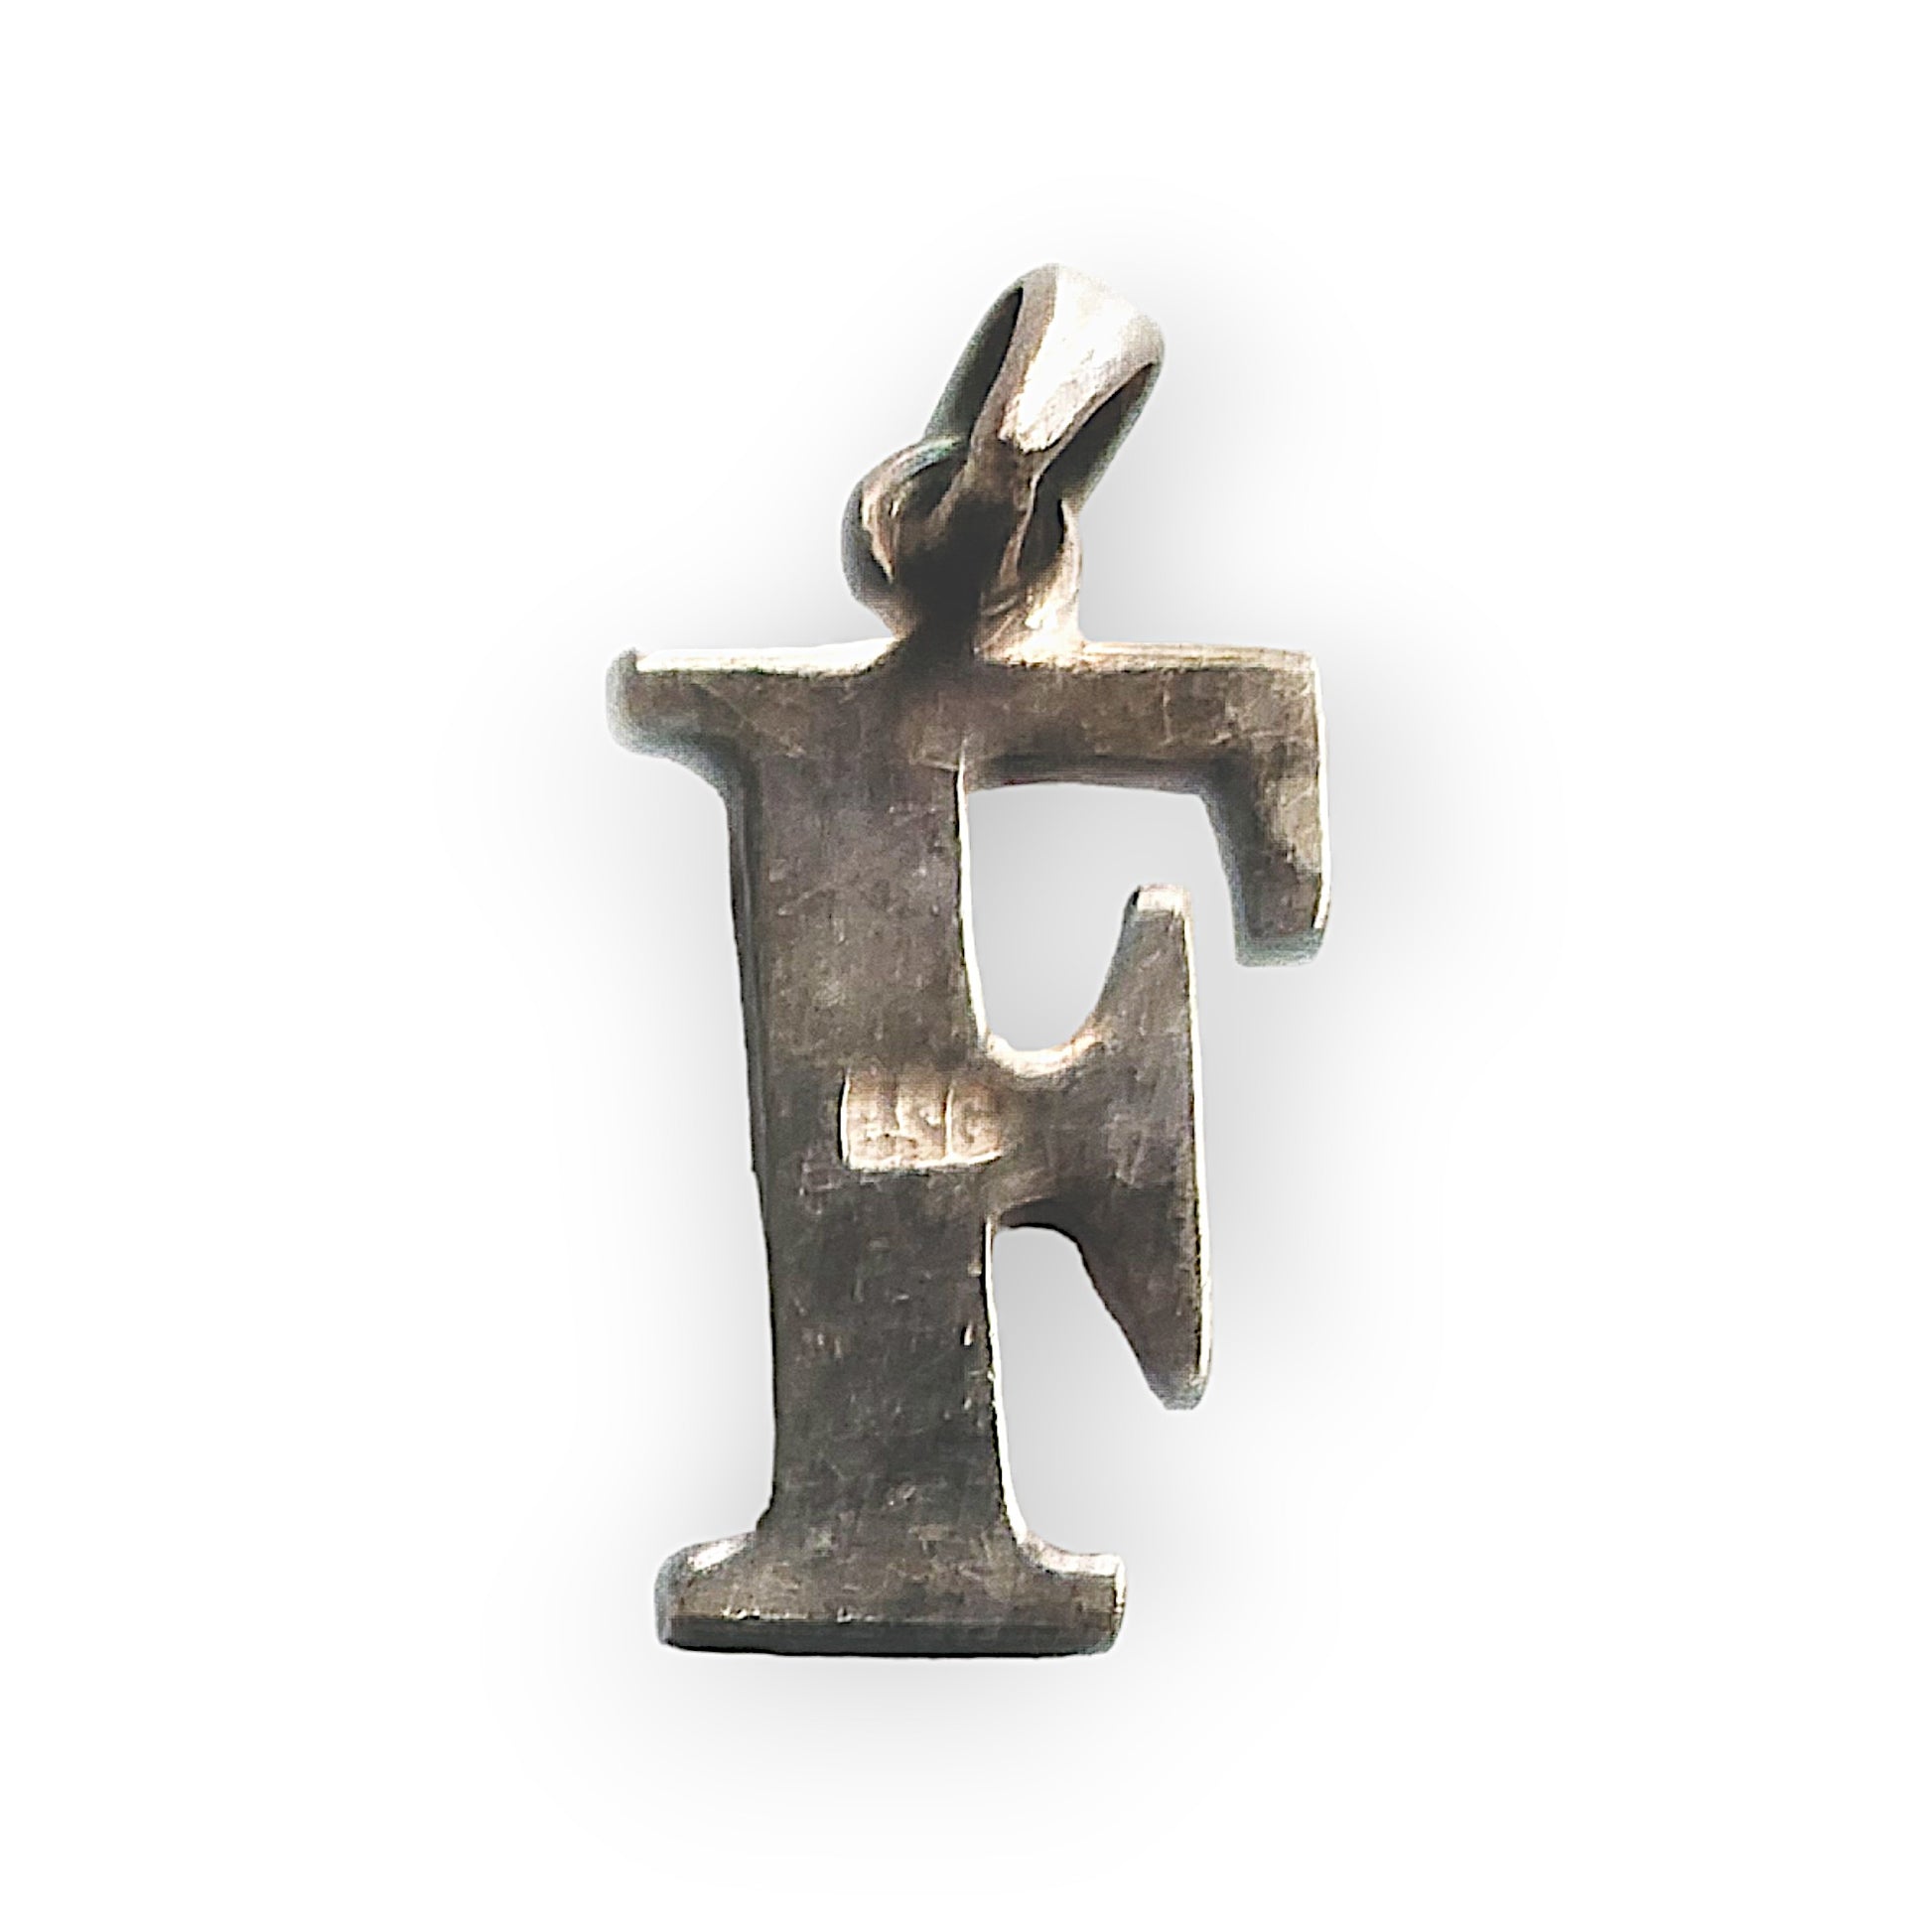 Solid 525 Silver Letter Pendant